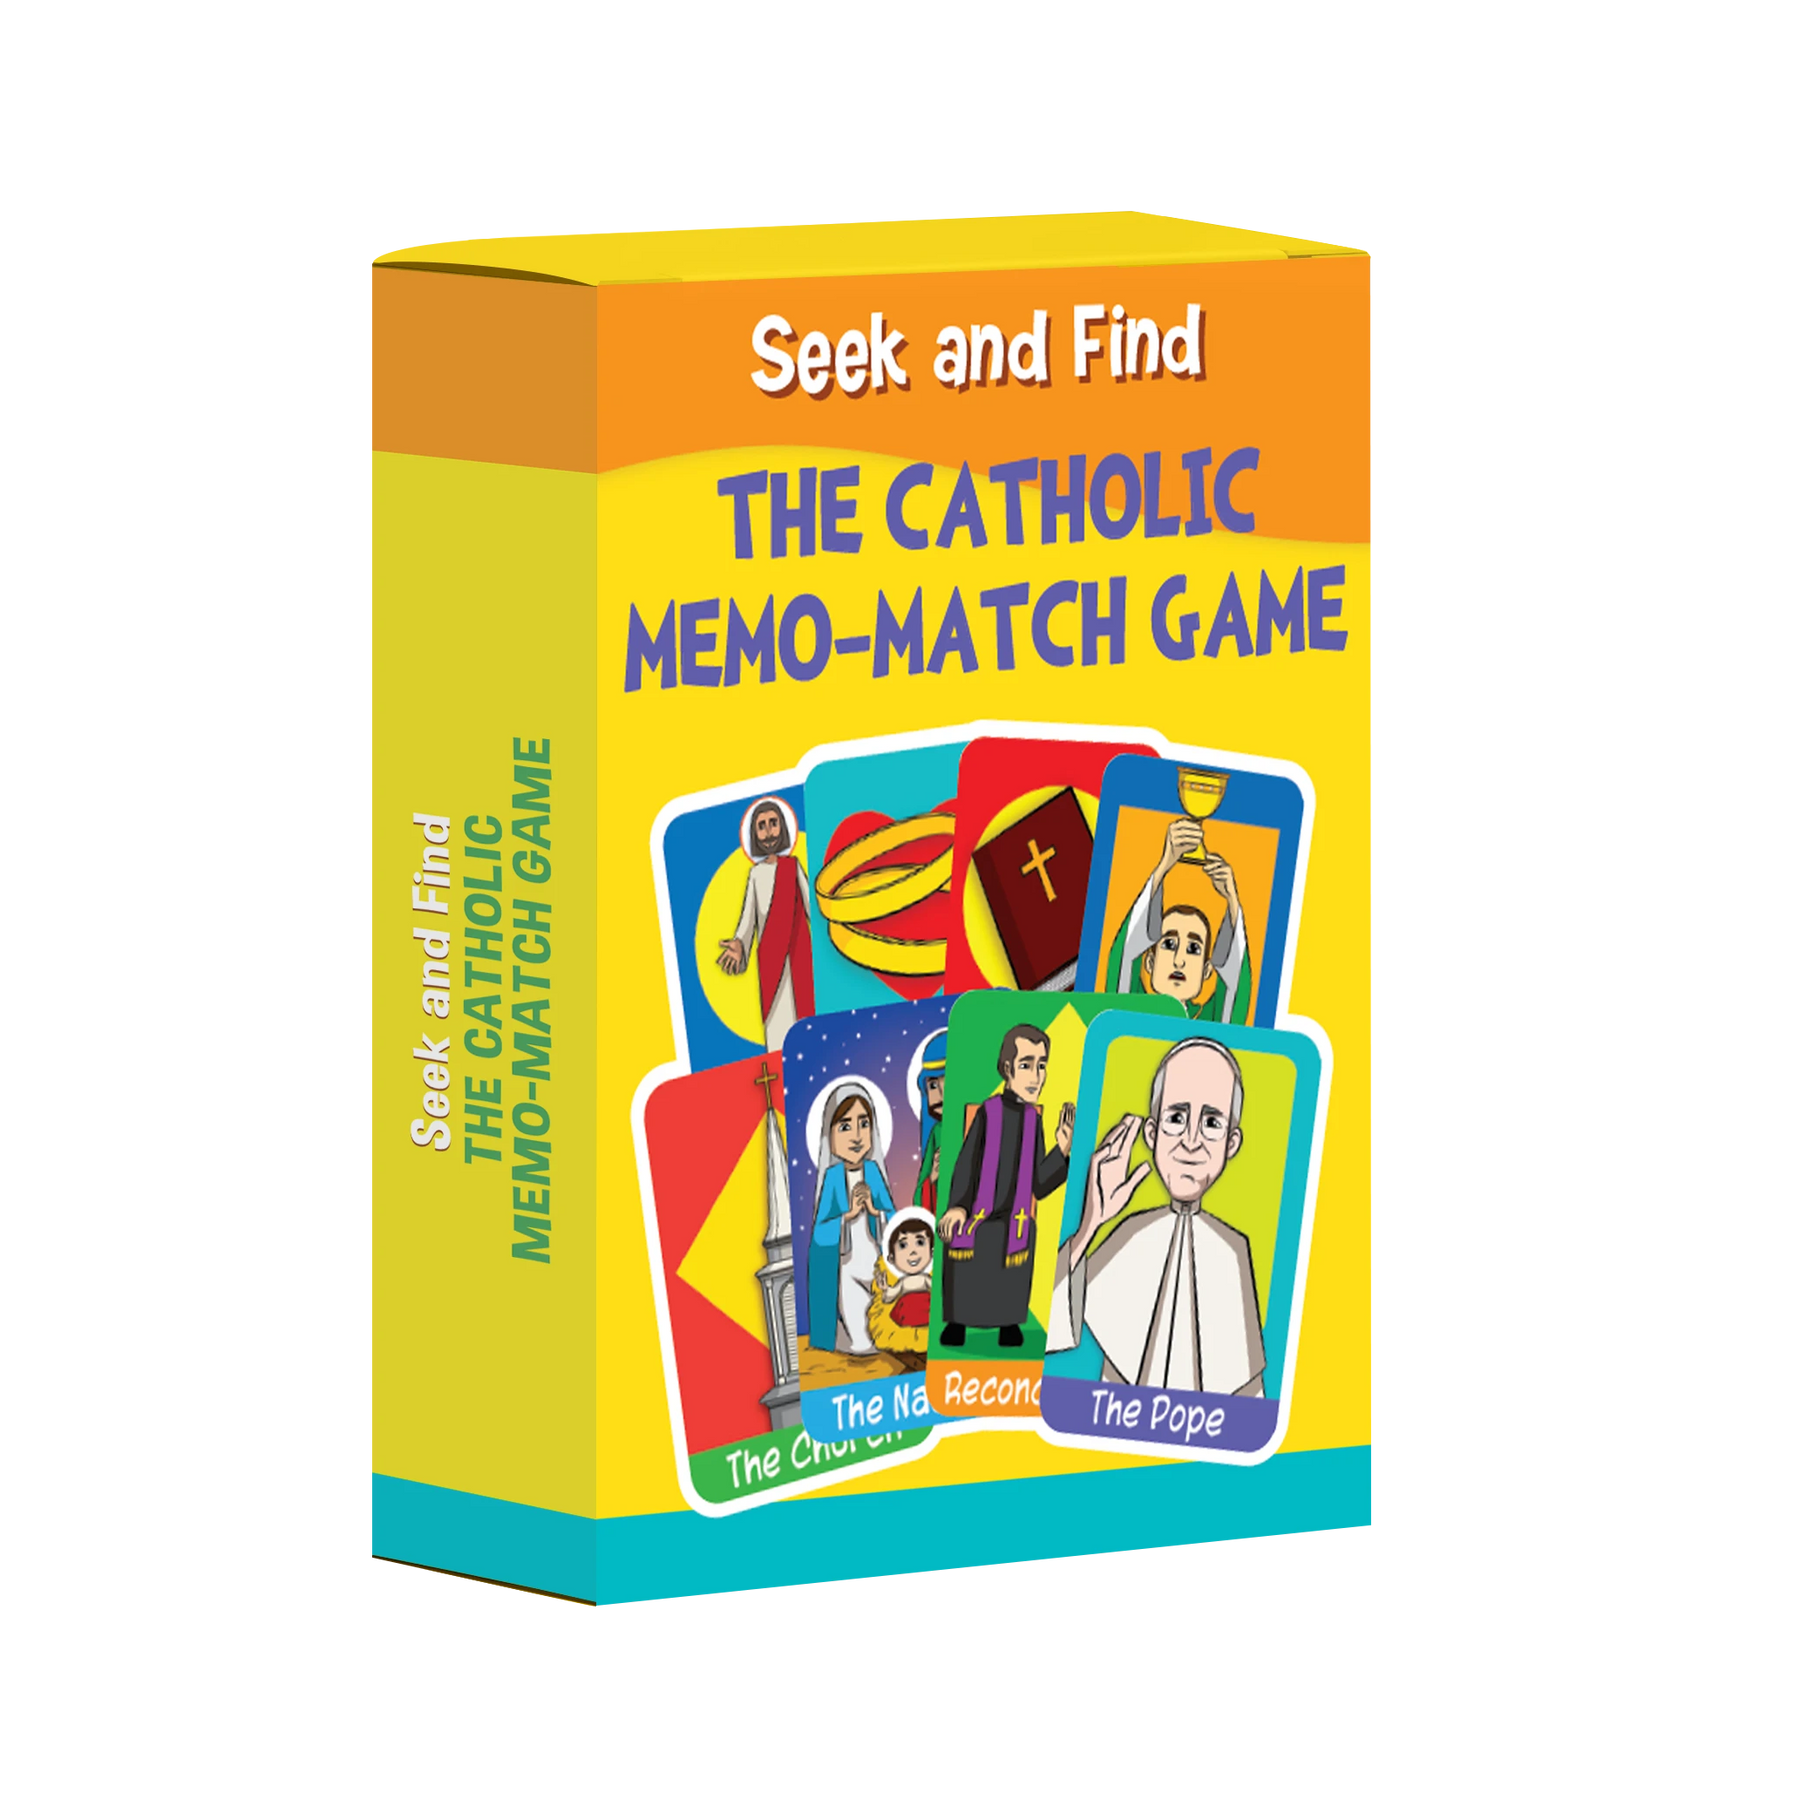 Seek and Find: The Catholic Memo-Match Game